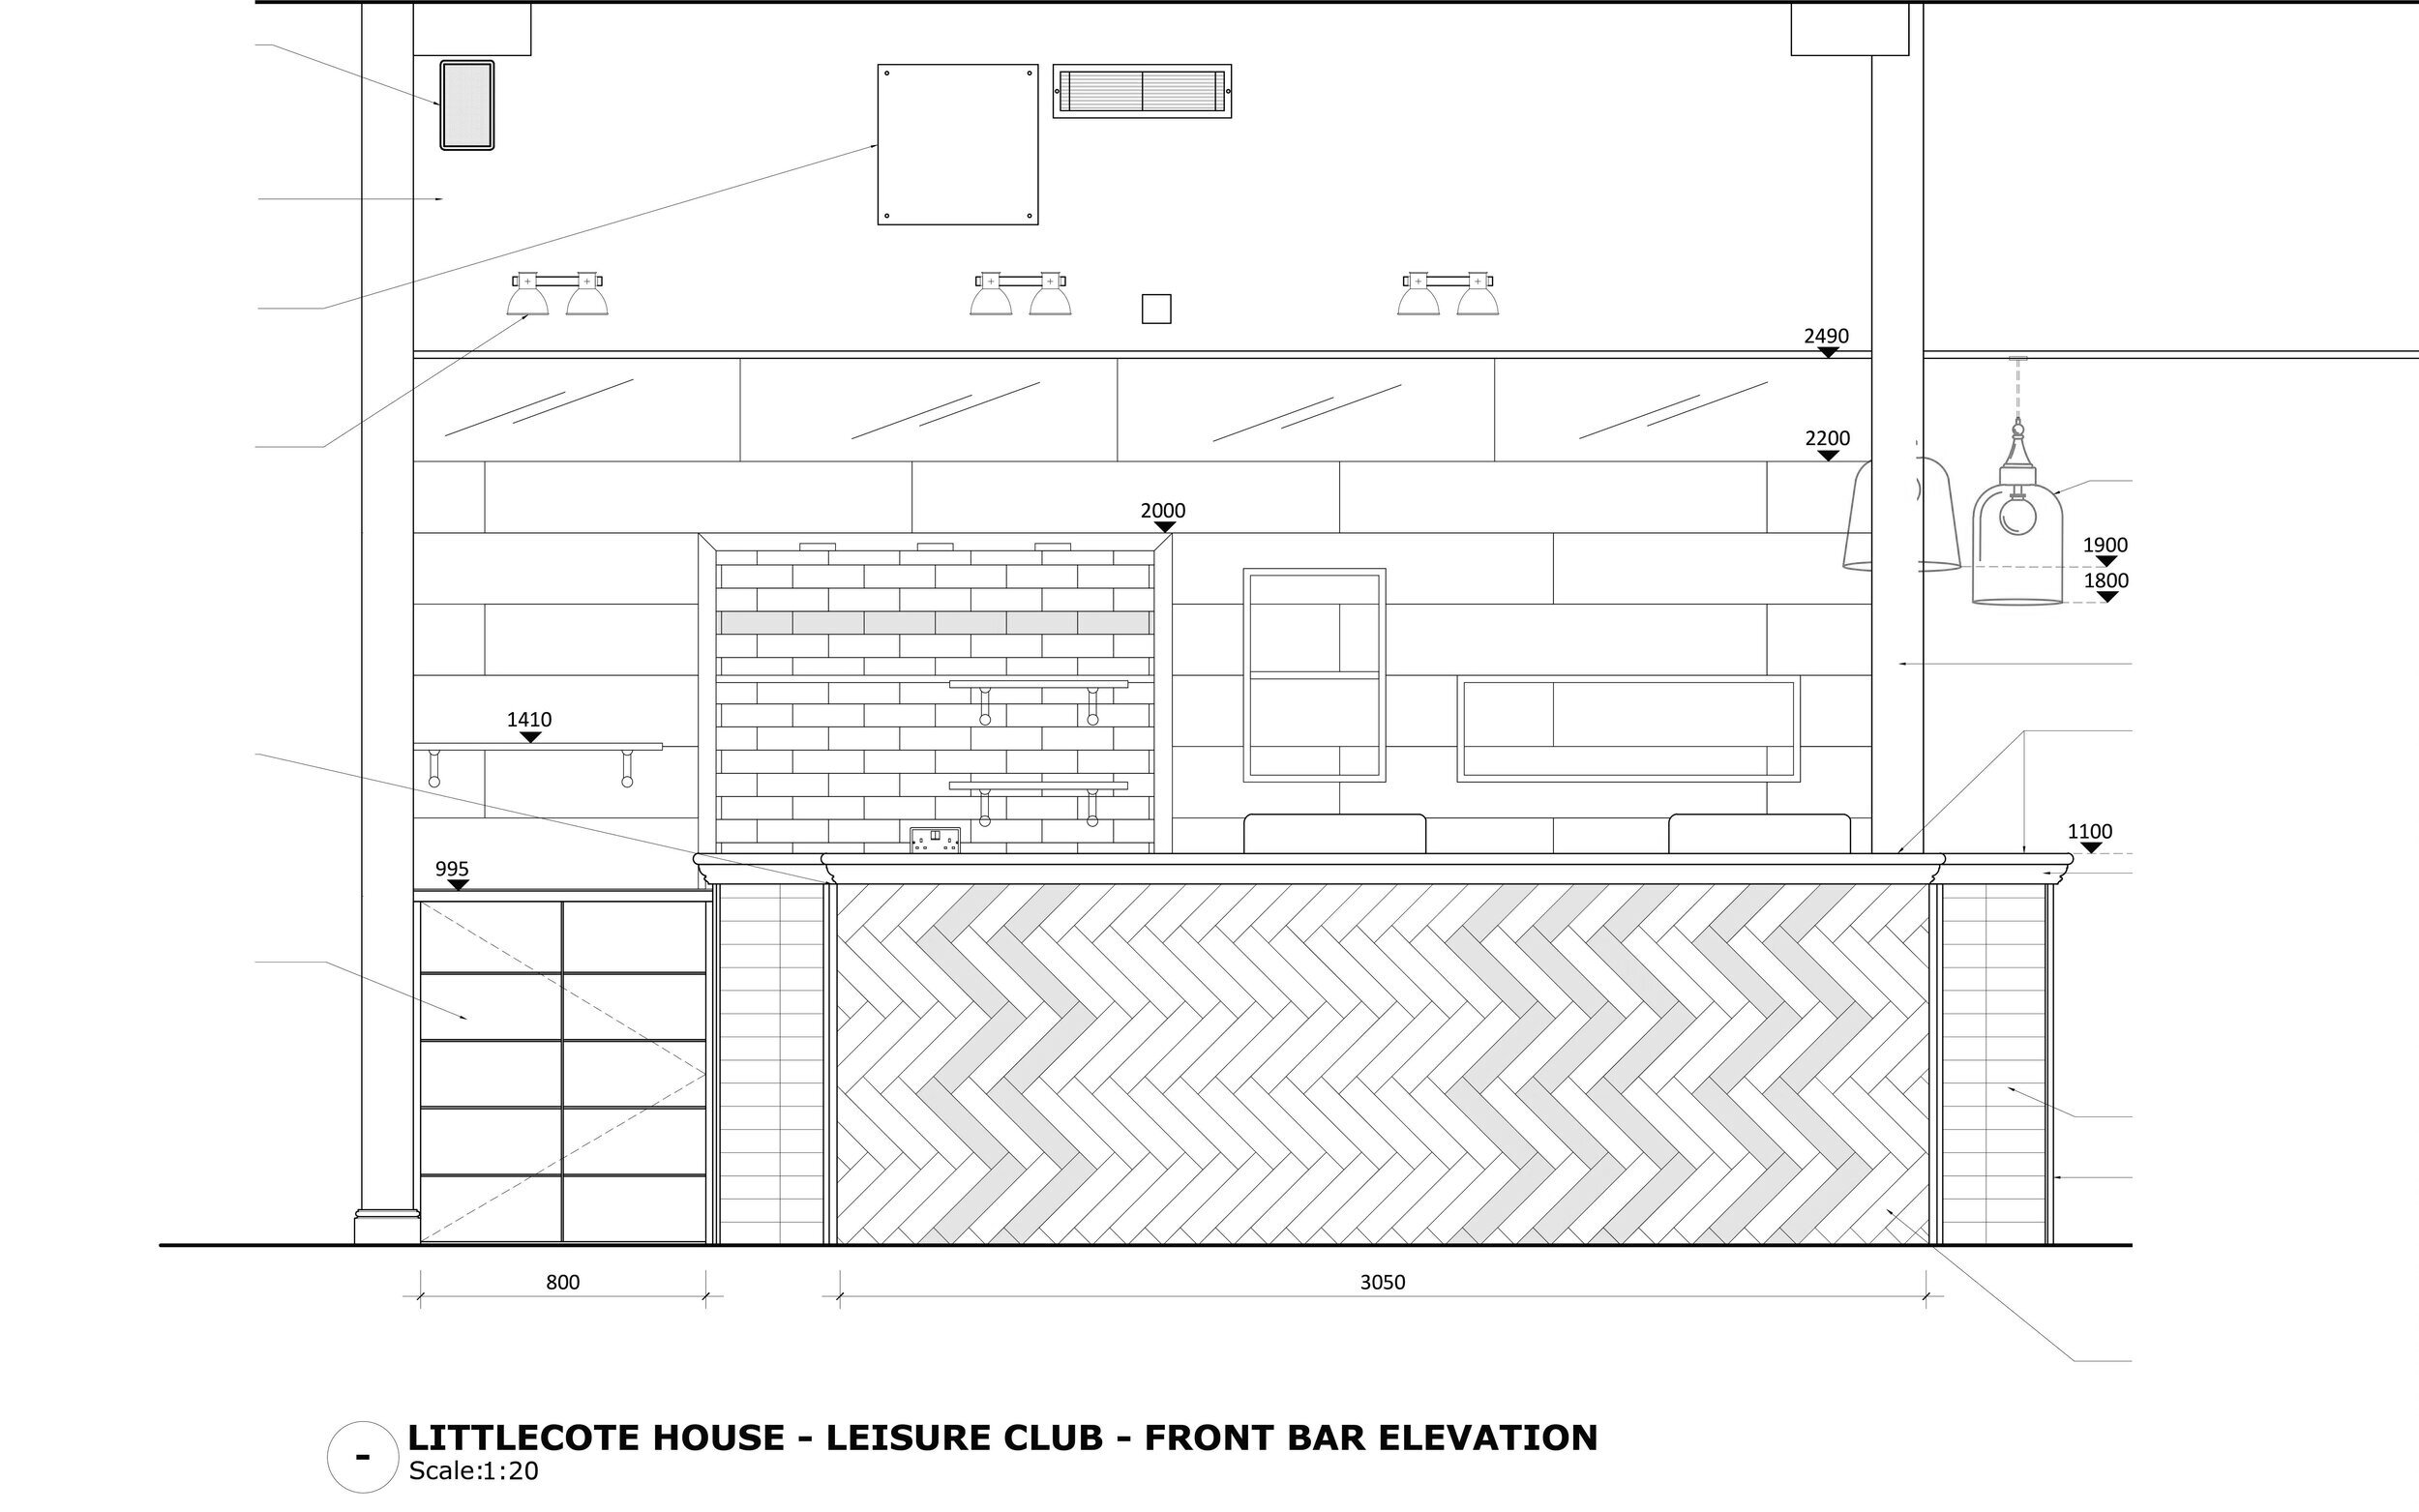 WL-LC-508-44+-++Littlecote+House+-+Leisure+Club+-+Front+Bar+Elevation.jpg